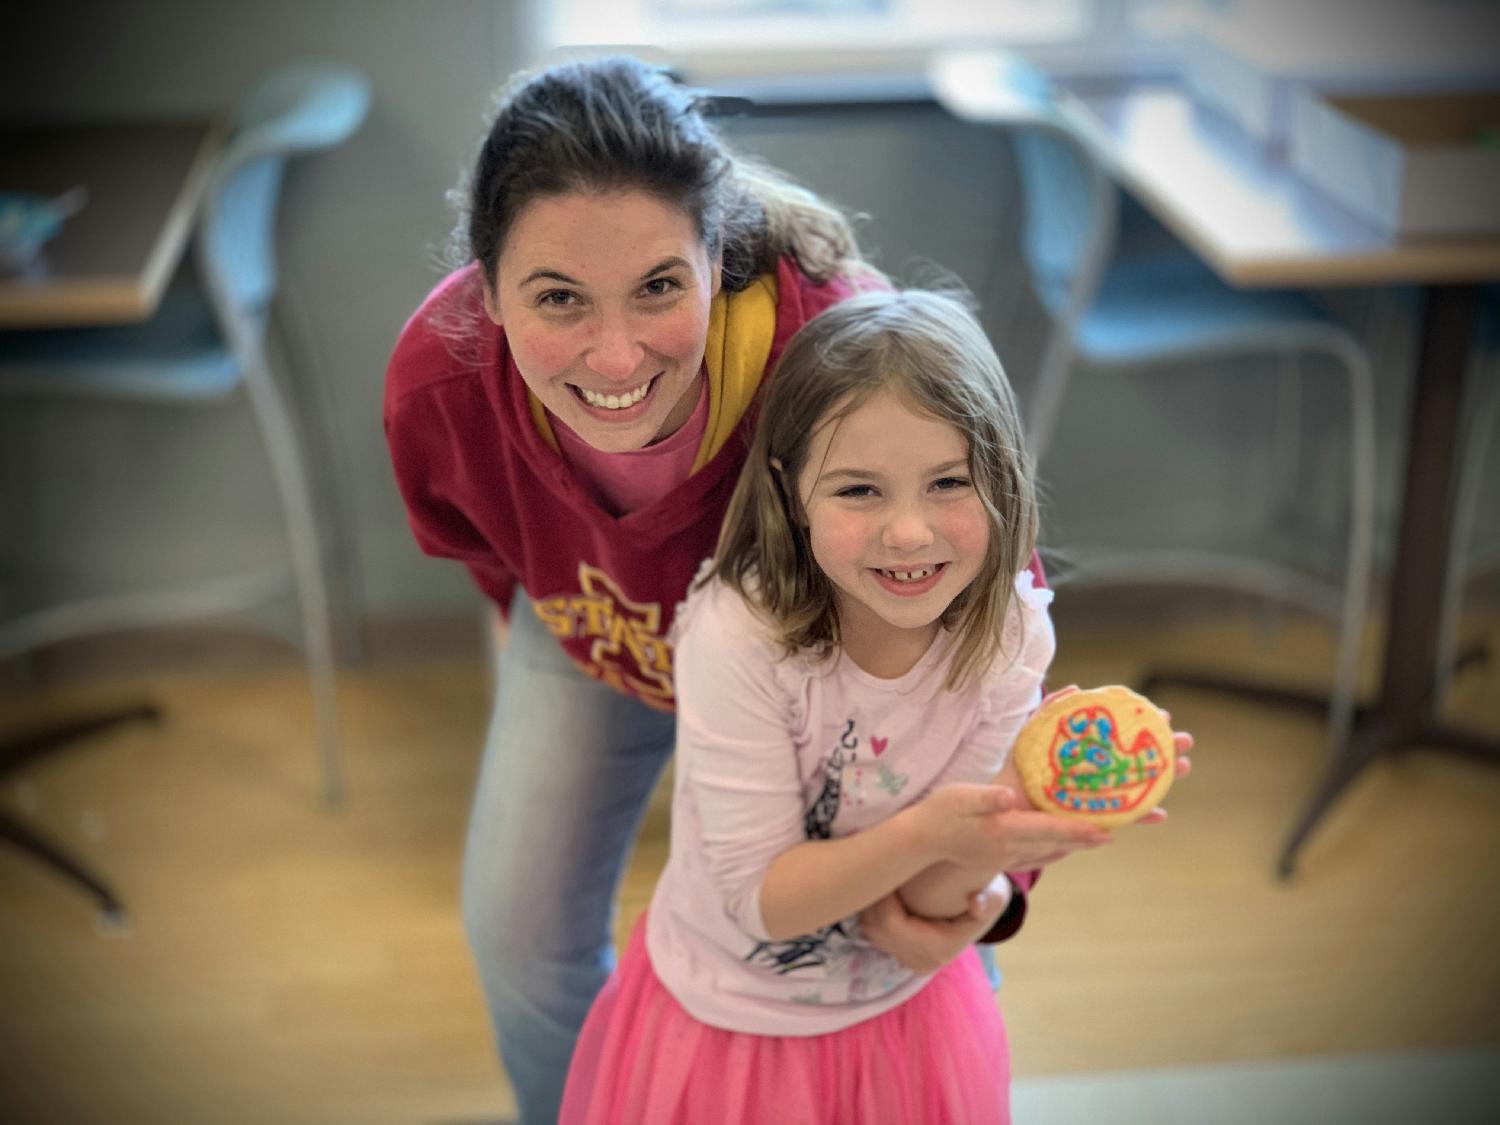 Jennifer and her daughter show off their artwork at ESCO's family holiday cookie decorating day.